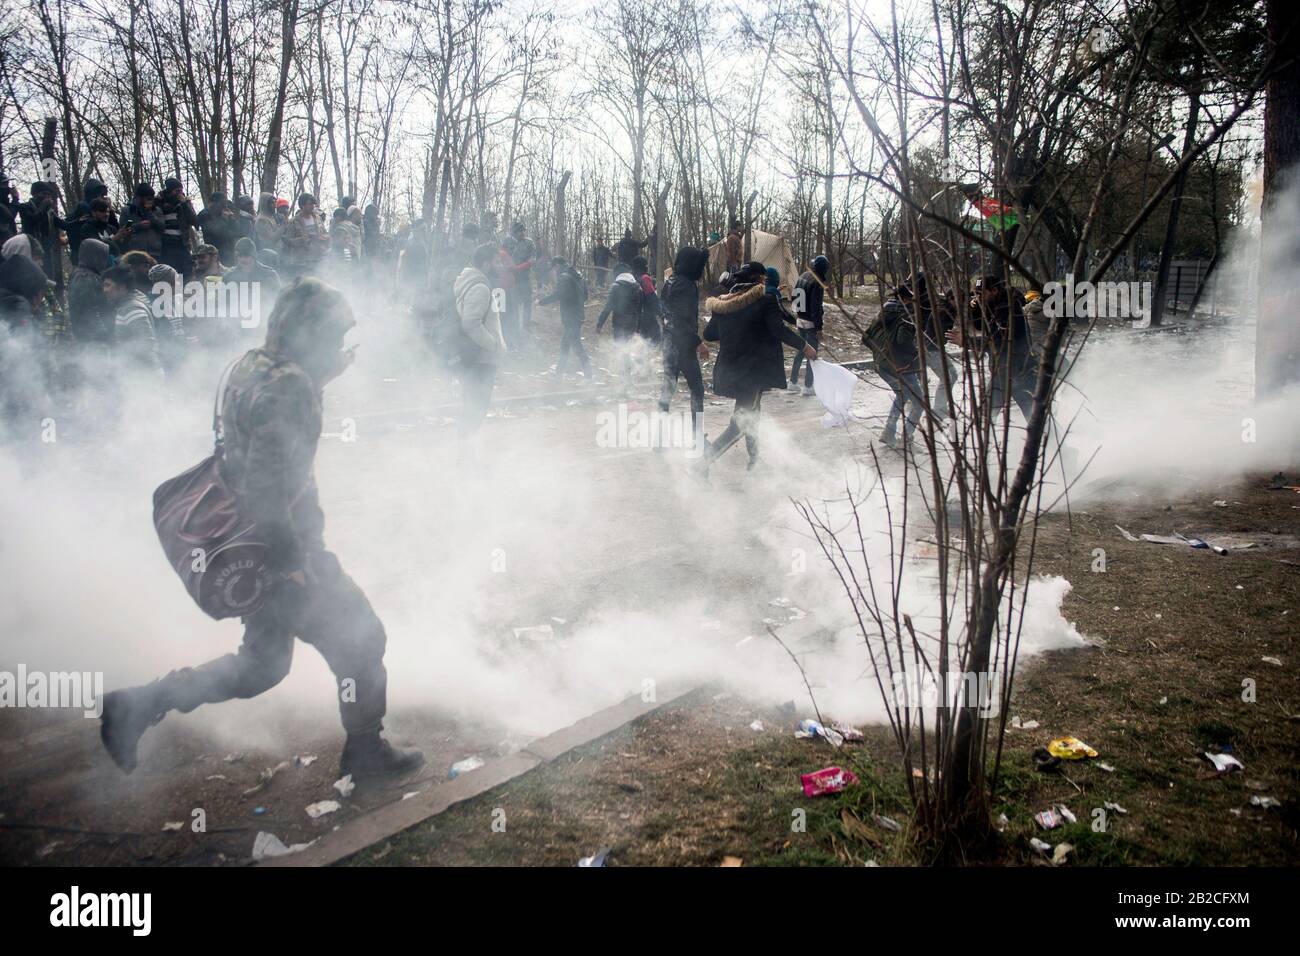 Istanbul. 2nd Mar, 2020. Illegal migrants are attacked by tear gas from Greek police at border zone in Edirne Province, Turkey, on March 1, 2020. TO GO WITH 'Greek police fire tear gas, rubber bullets against refugees at border zone in Turkey' Credit: Xinhua/Alamy Live News Stock Photo